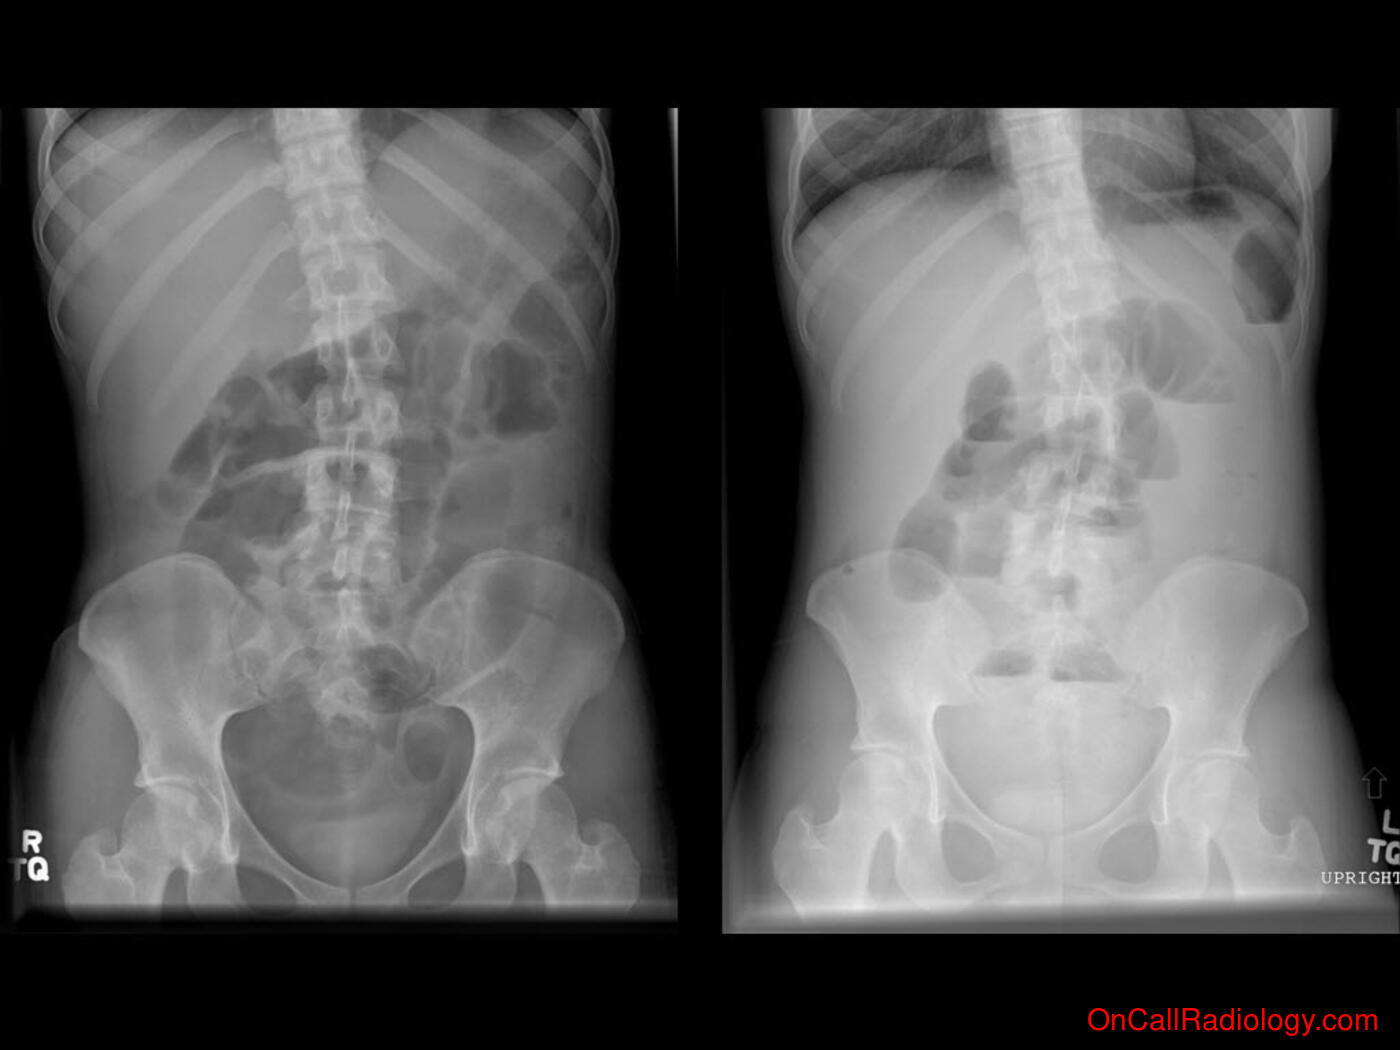 Obstruction (Crohns flare causing small bowel obstruction - Plain film, Radiograph, CT, Computed tomography)